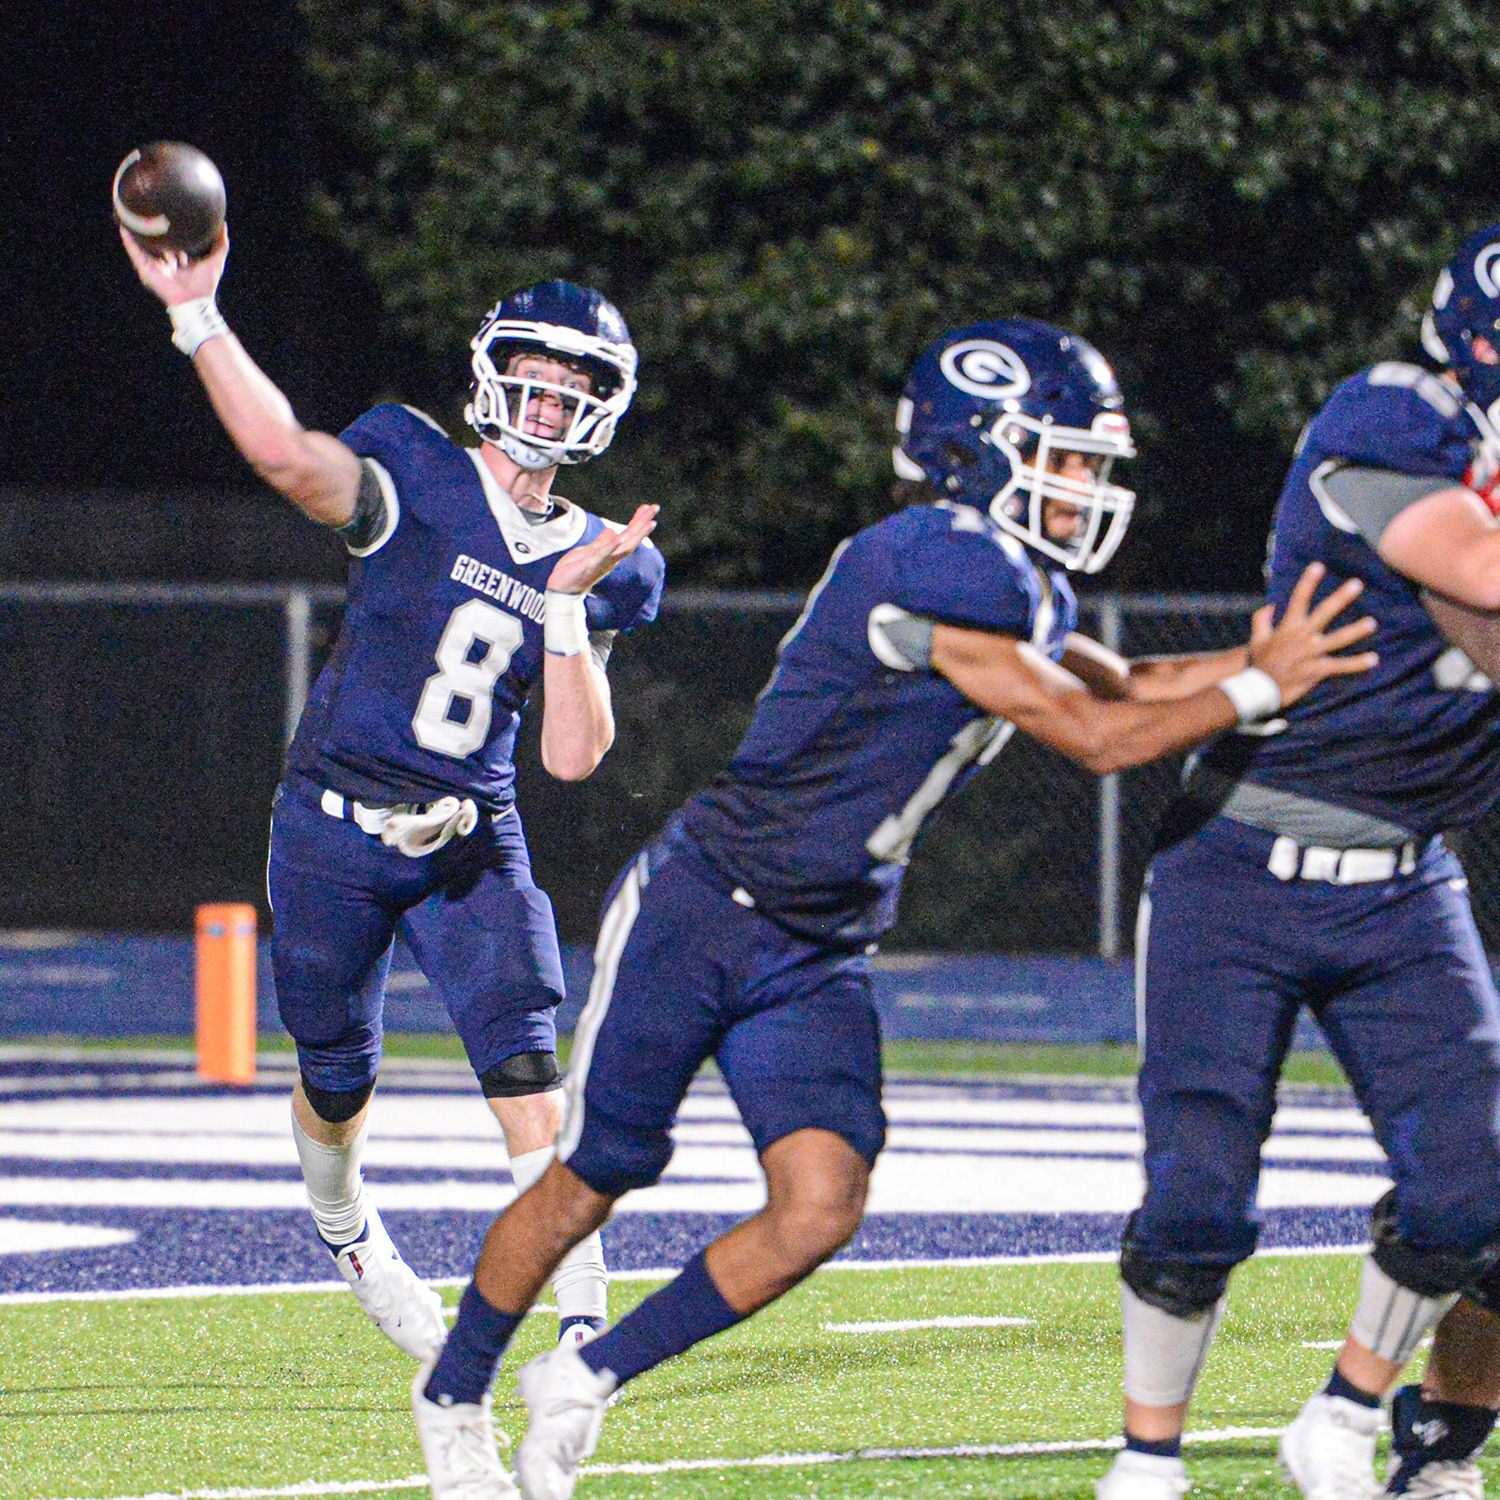 Greenwood wins with a Hail Mary